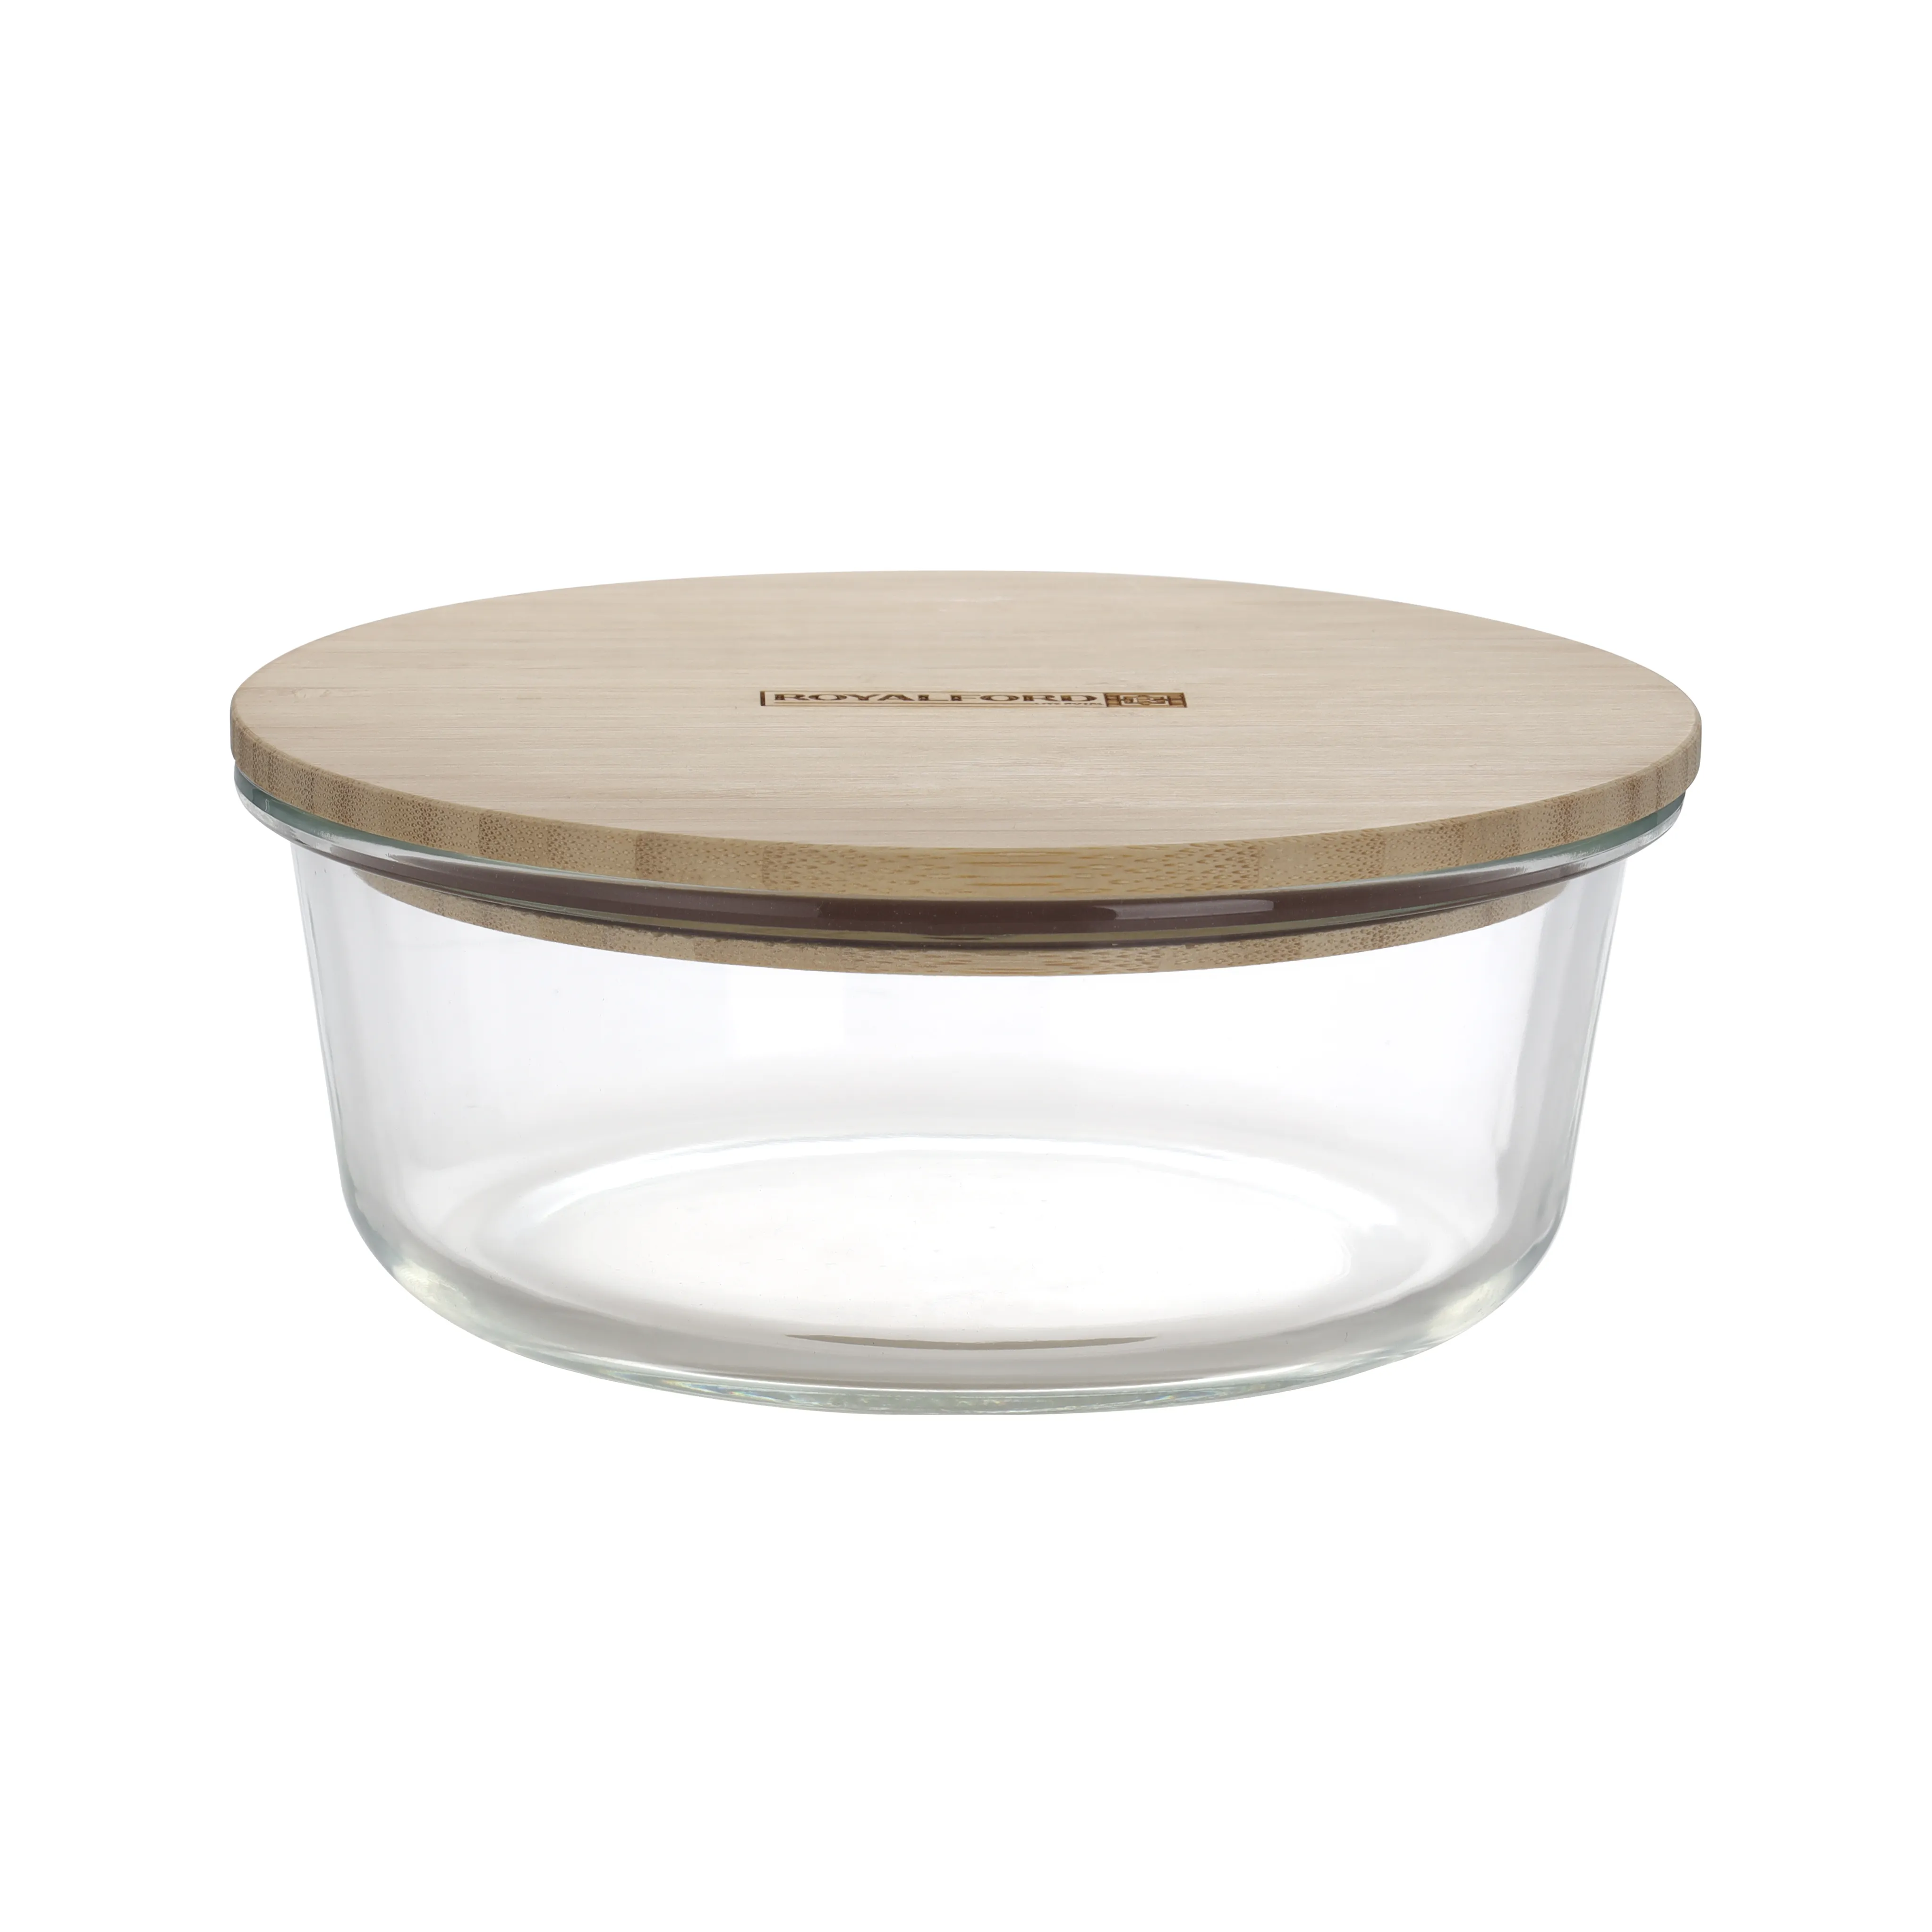 Royalford Round Glass Food Container with Bamboo Lid, RF10326 - Freezer & Dishwasher Safe, Air Tight Lid with Silicone Sealing Ring, Portable, Eco-Friendly